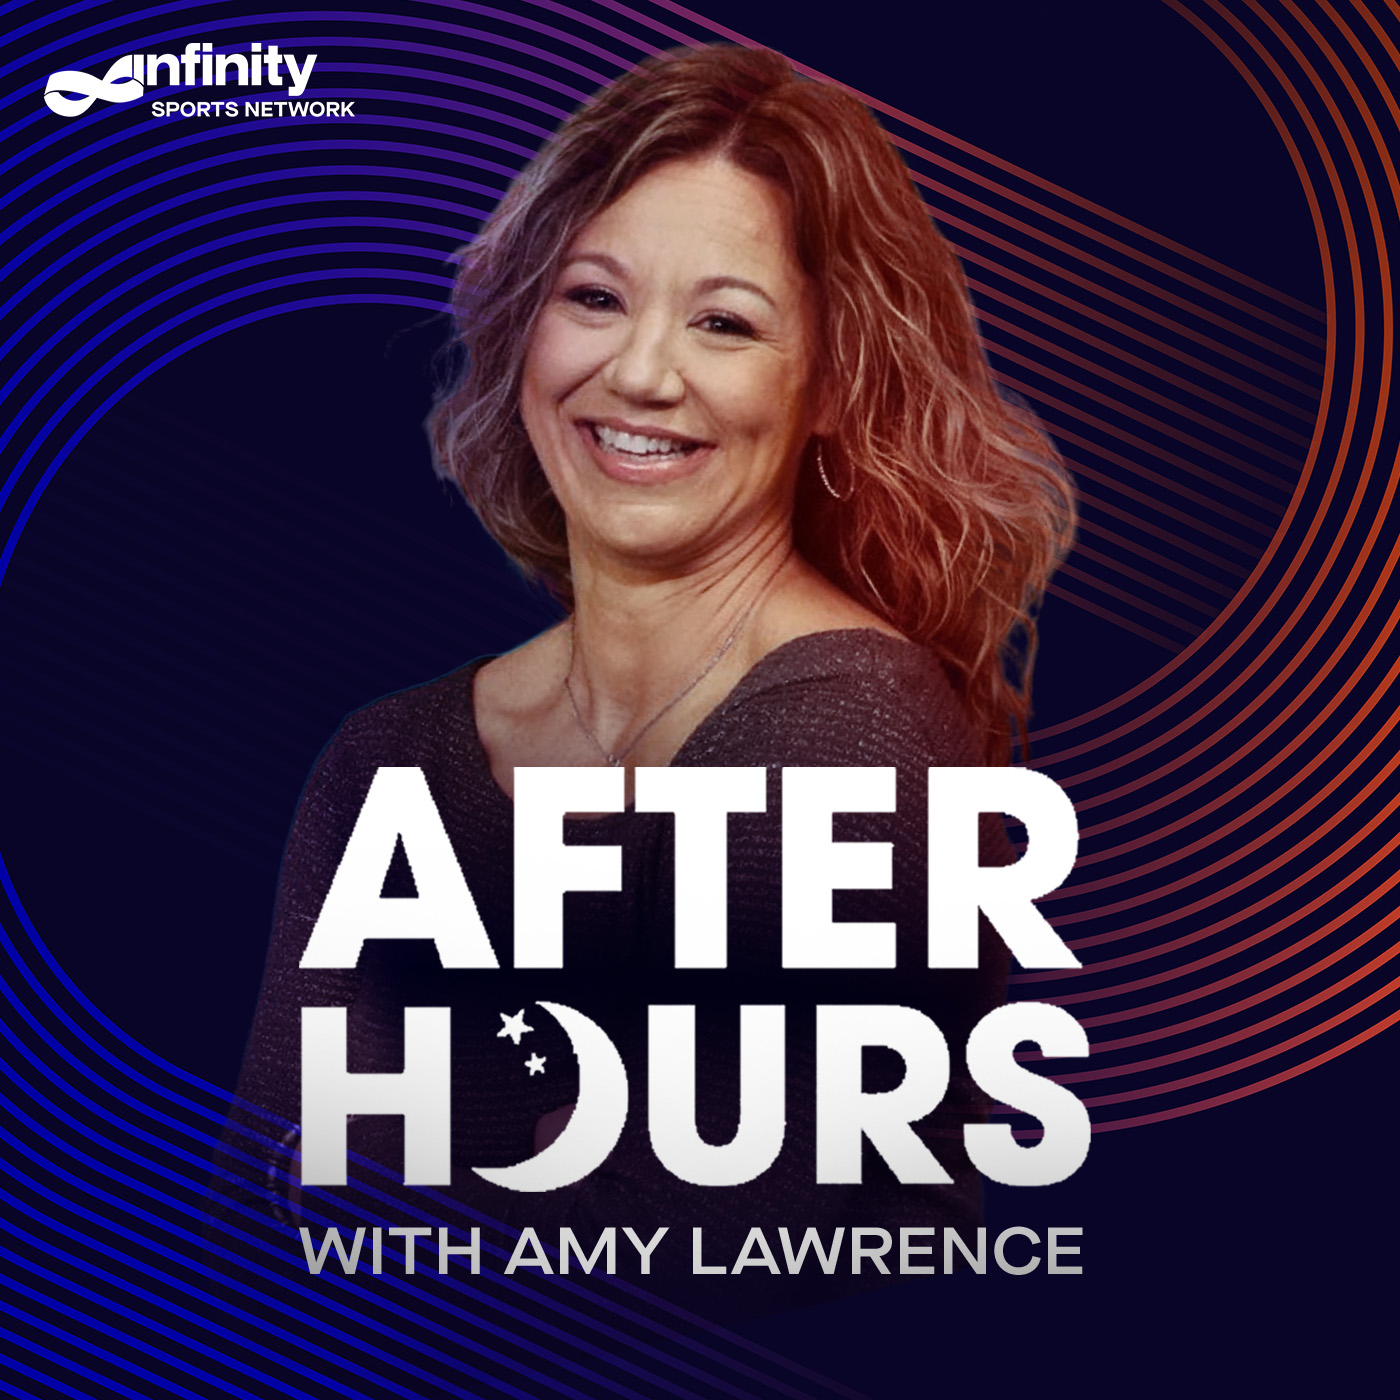 5/17/21 After Hours with Amy Lawrence PODCAST: Hour 1